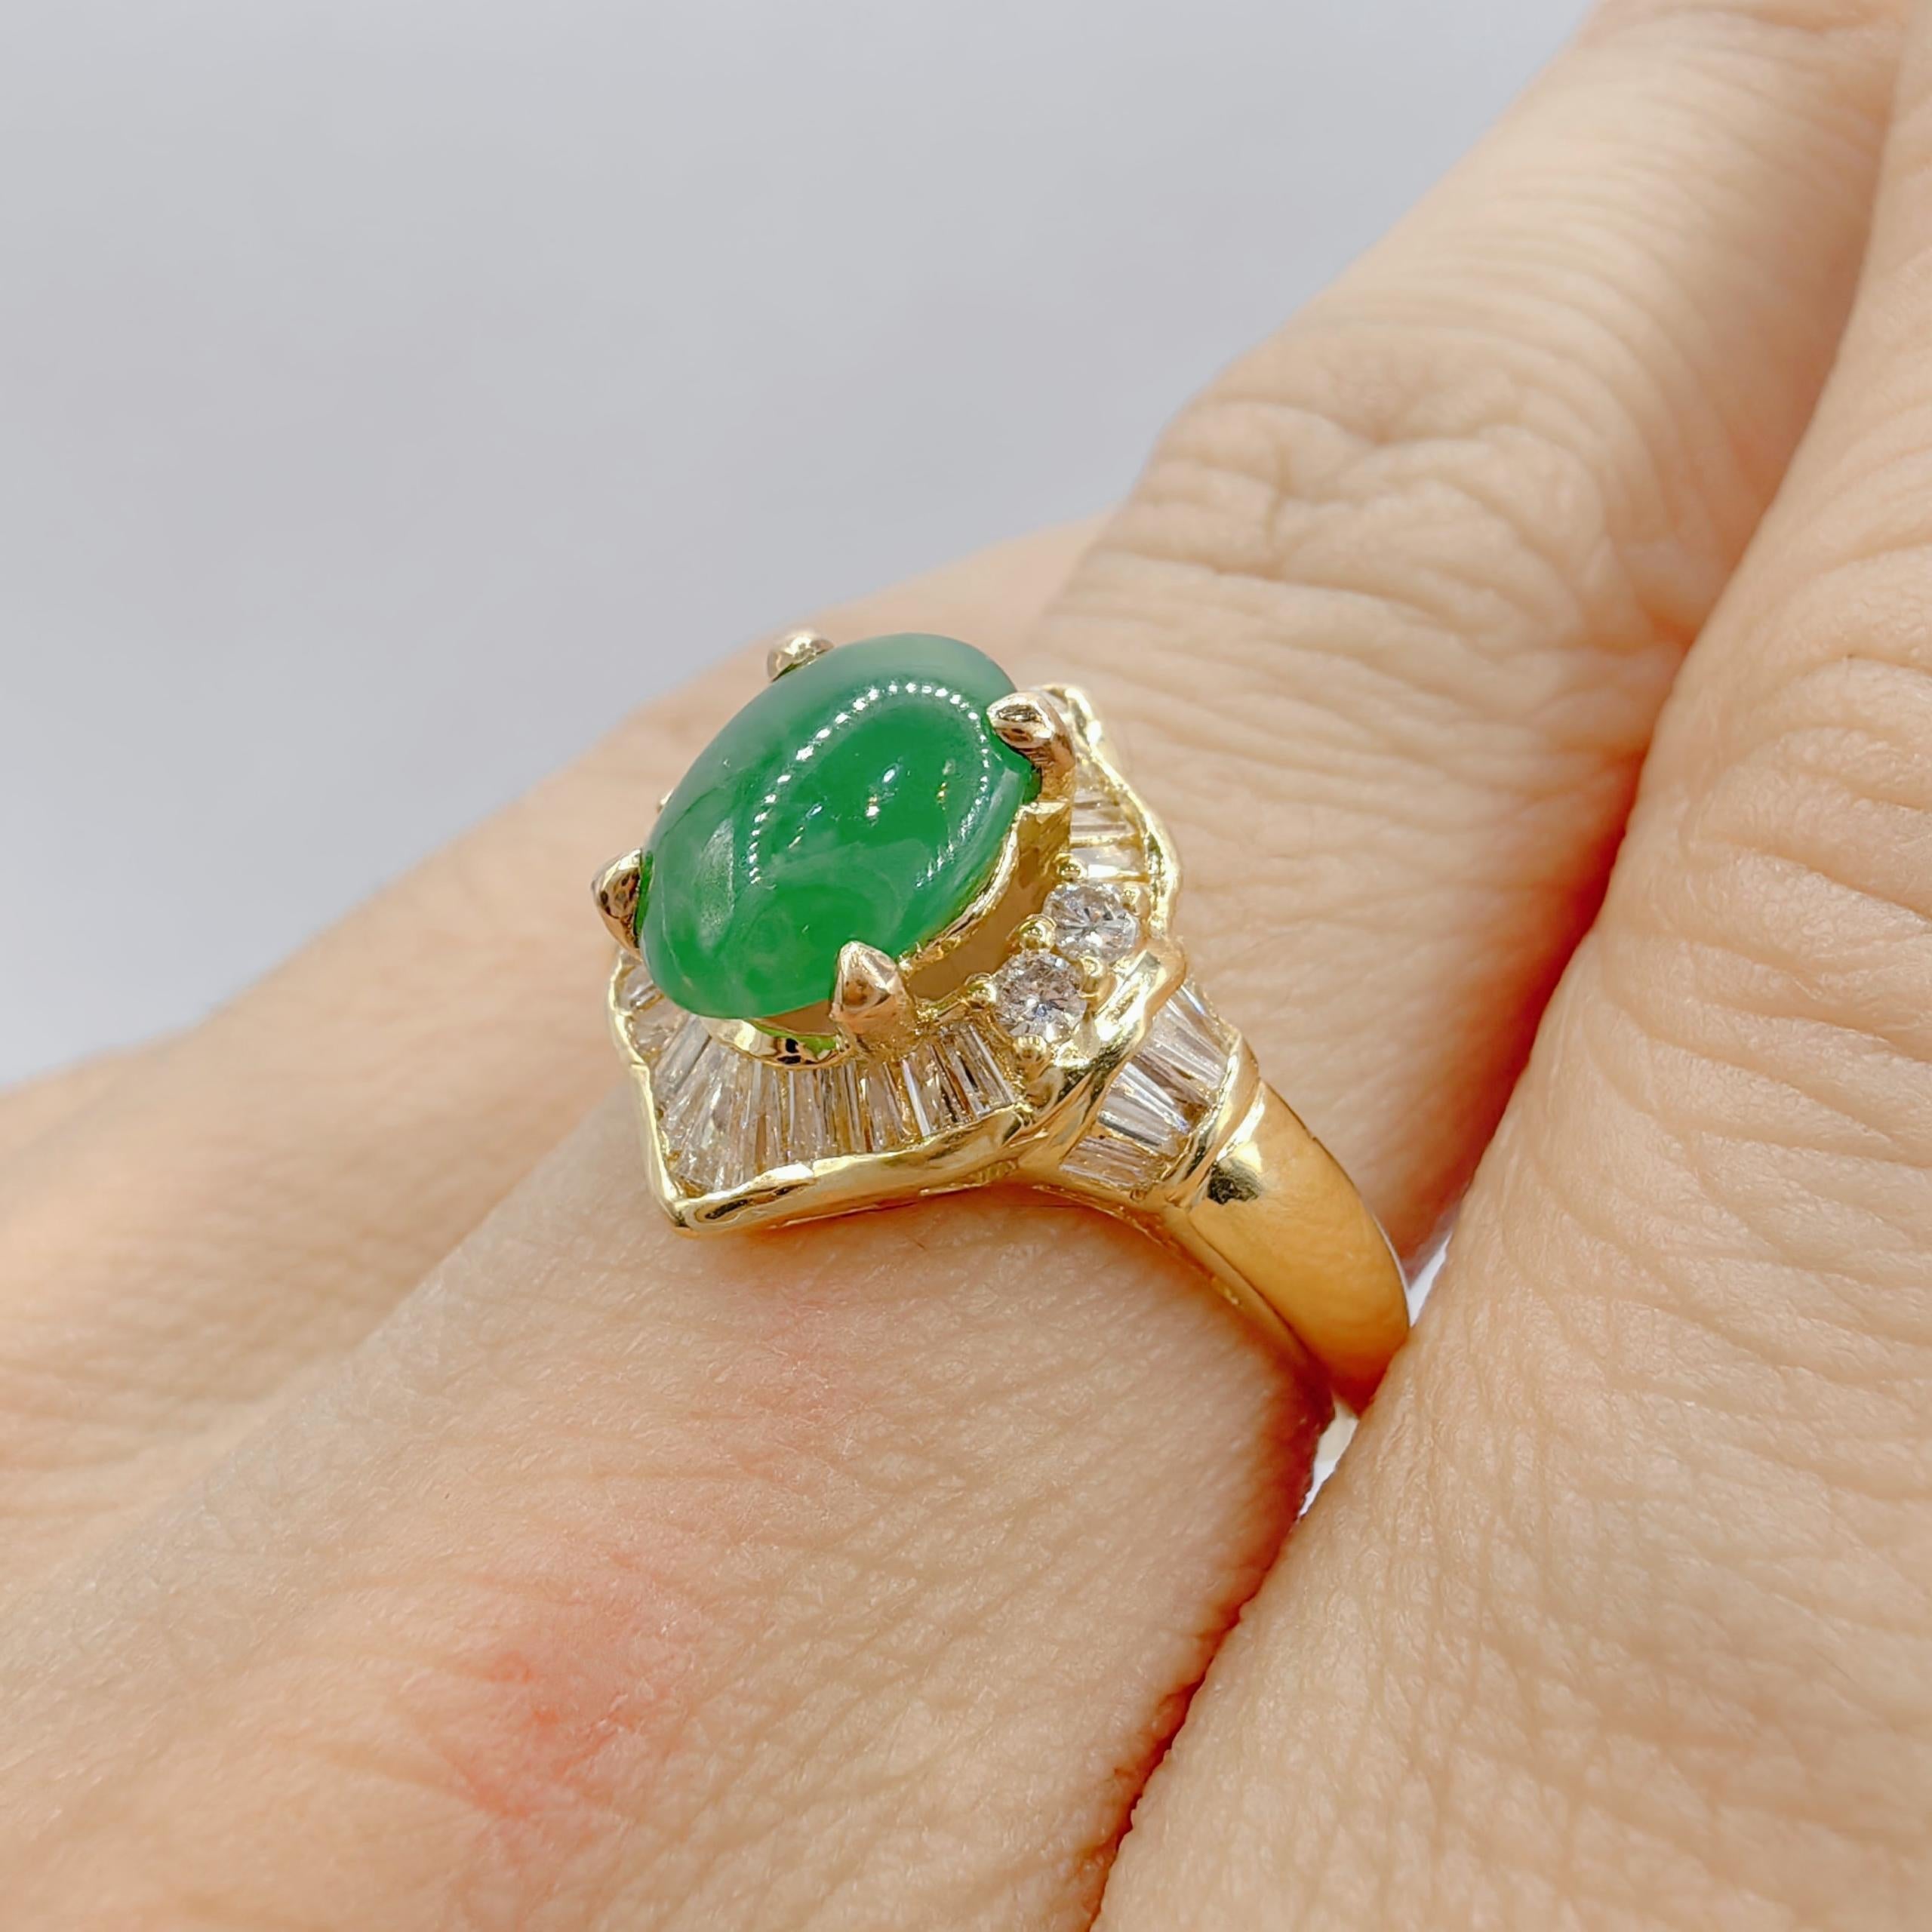 Vintage 1.56ct Oval Cabochon Apple Green Jadeite Jade Diamond Ring in 20k Gold For Sale 3